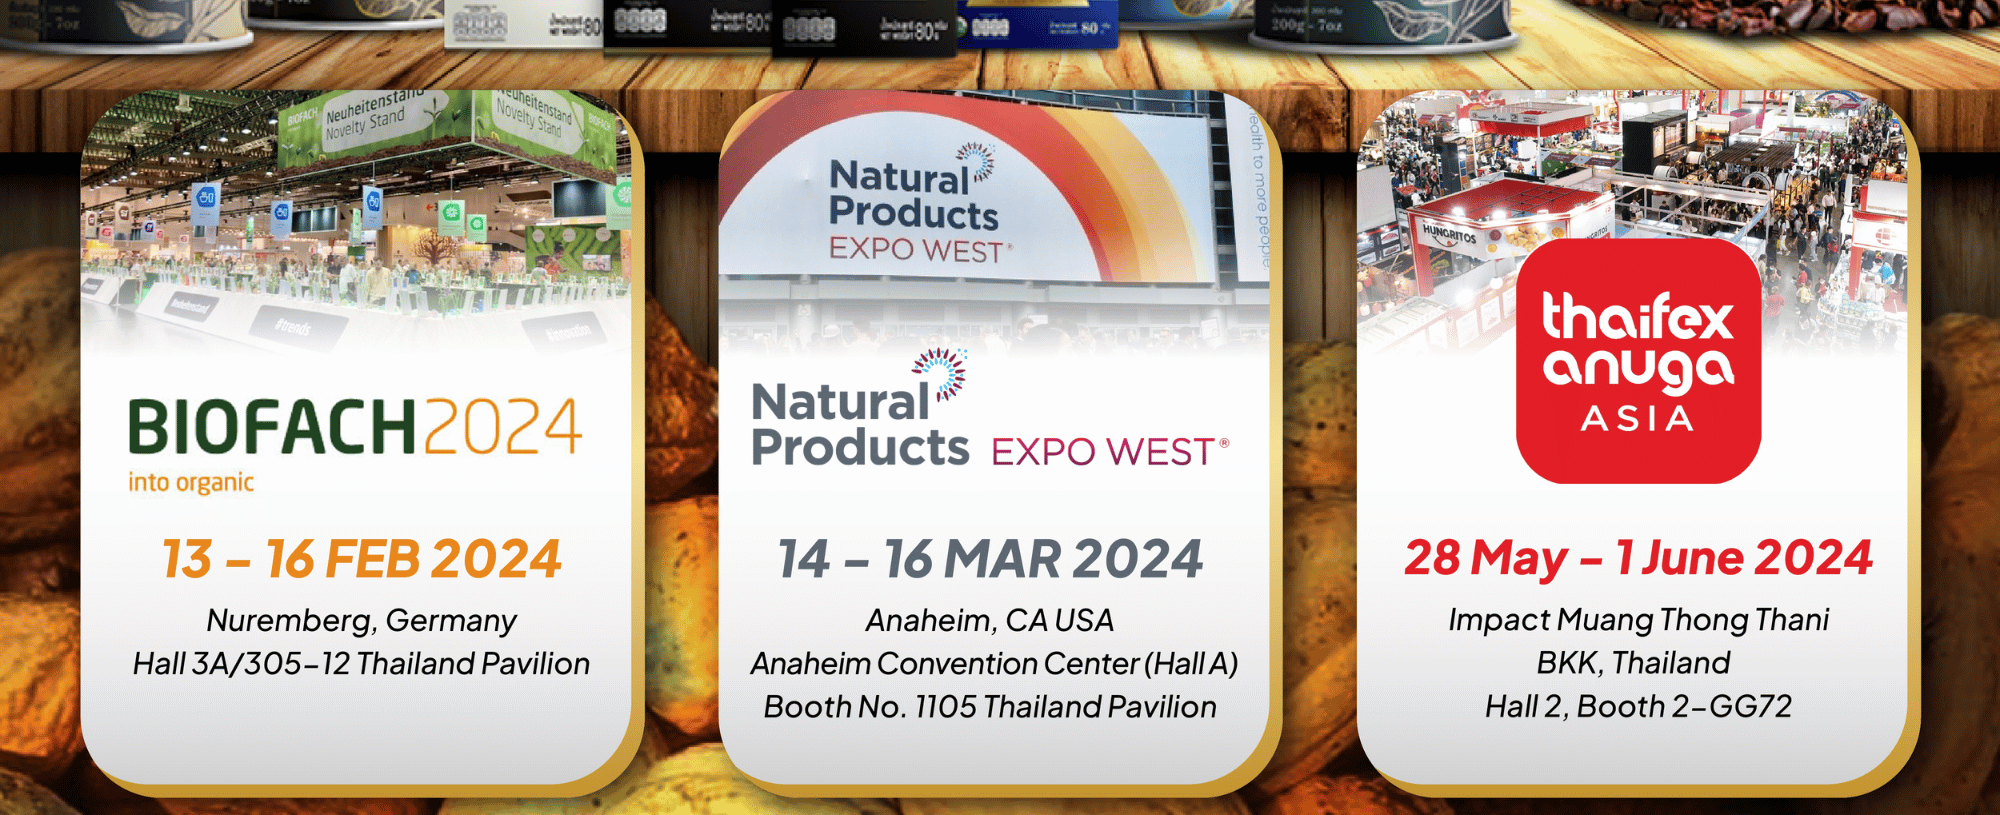 beginning of 2024 – Biofach 2024 and Natural Products Expo West 2024.